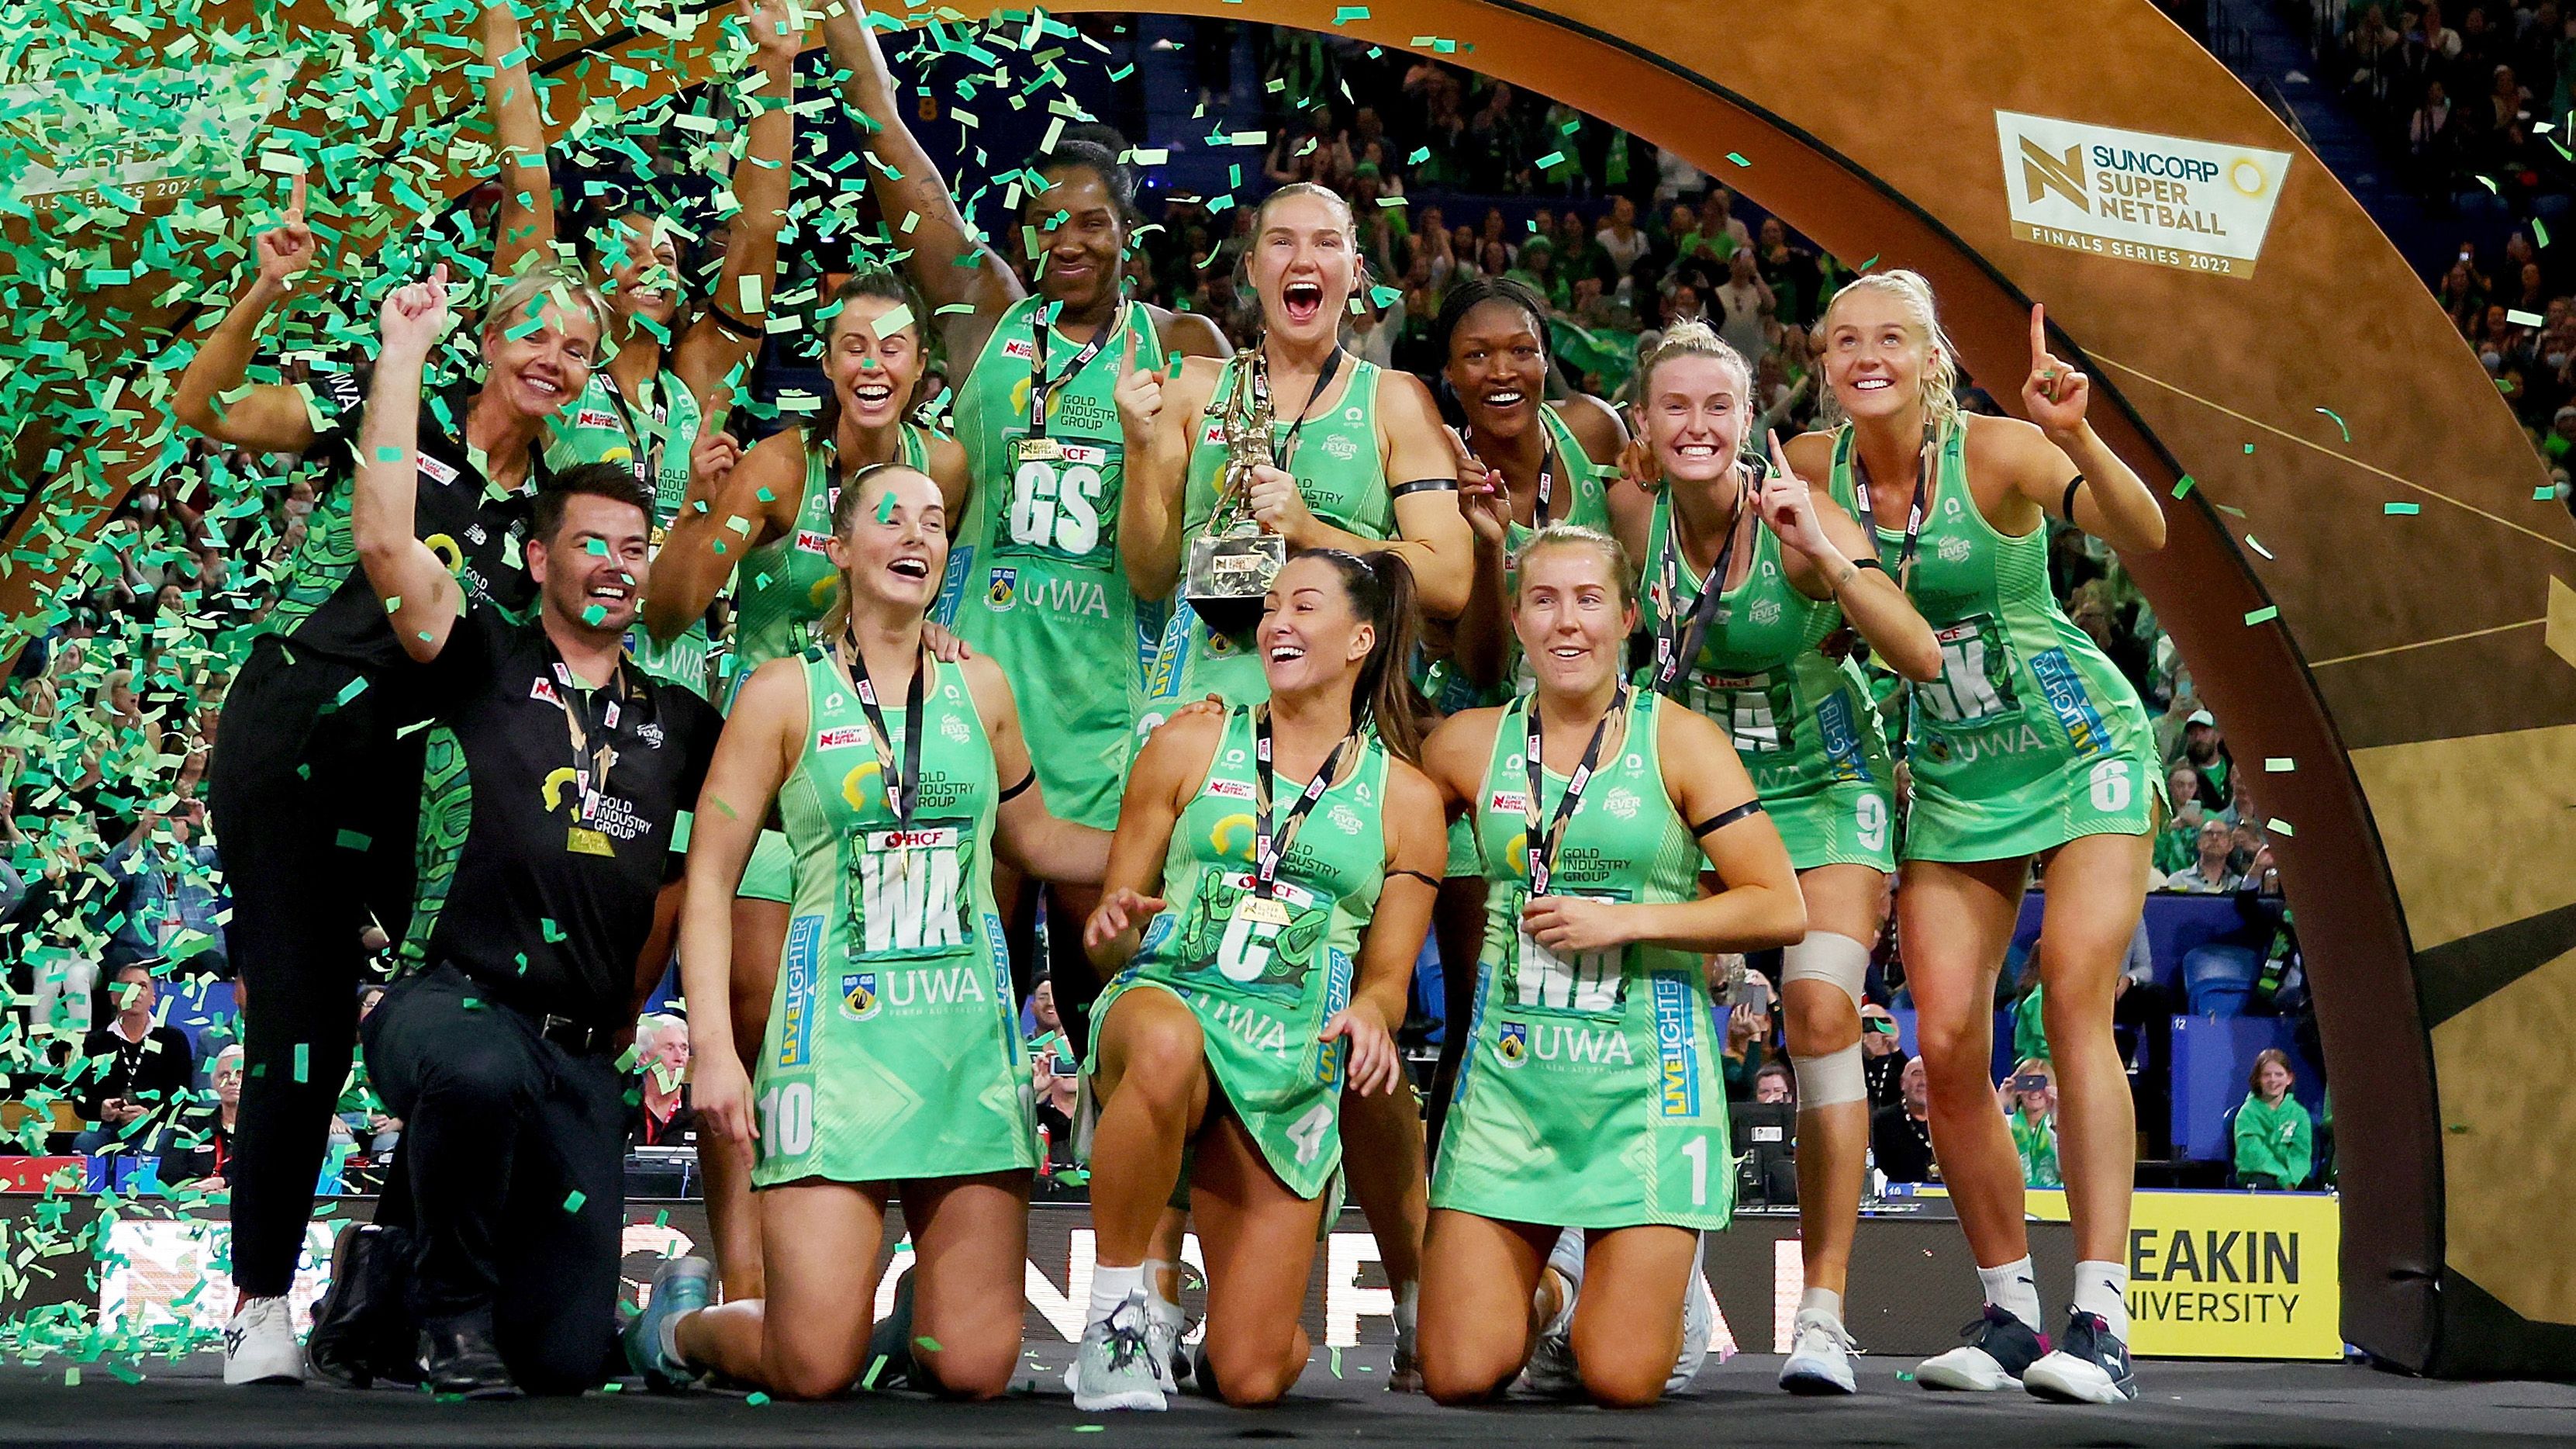 Team boss hits out as West Coast Fever become $2 million 'collateral damage' of sponsorship saga